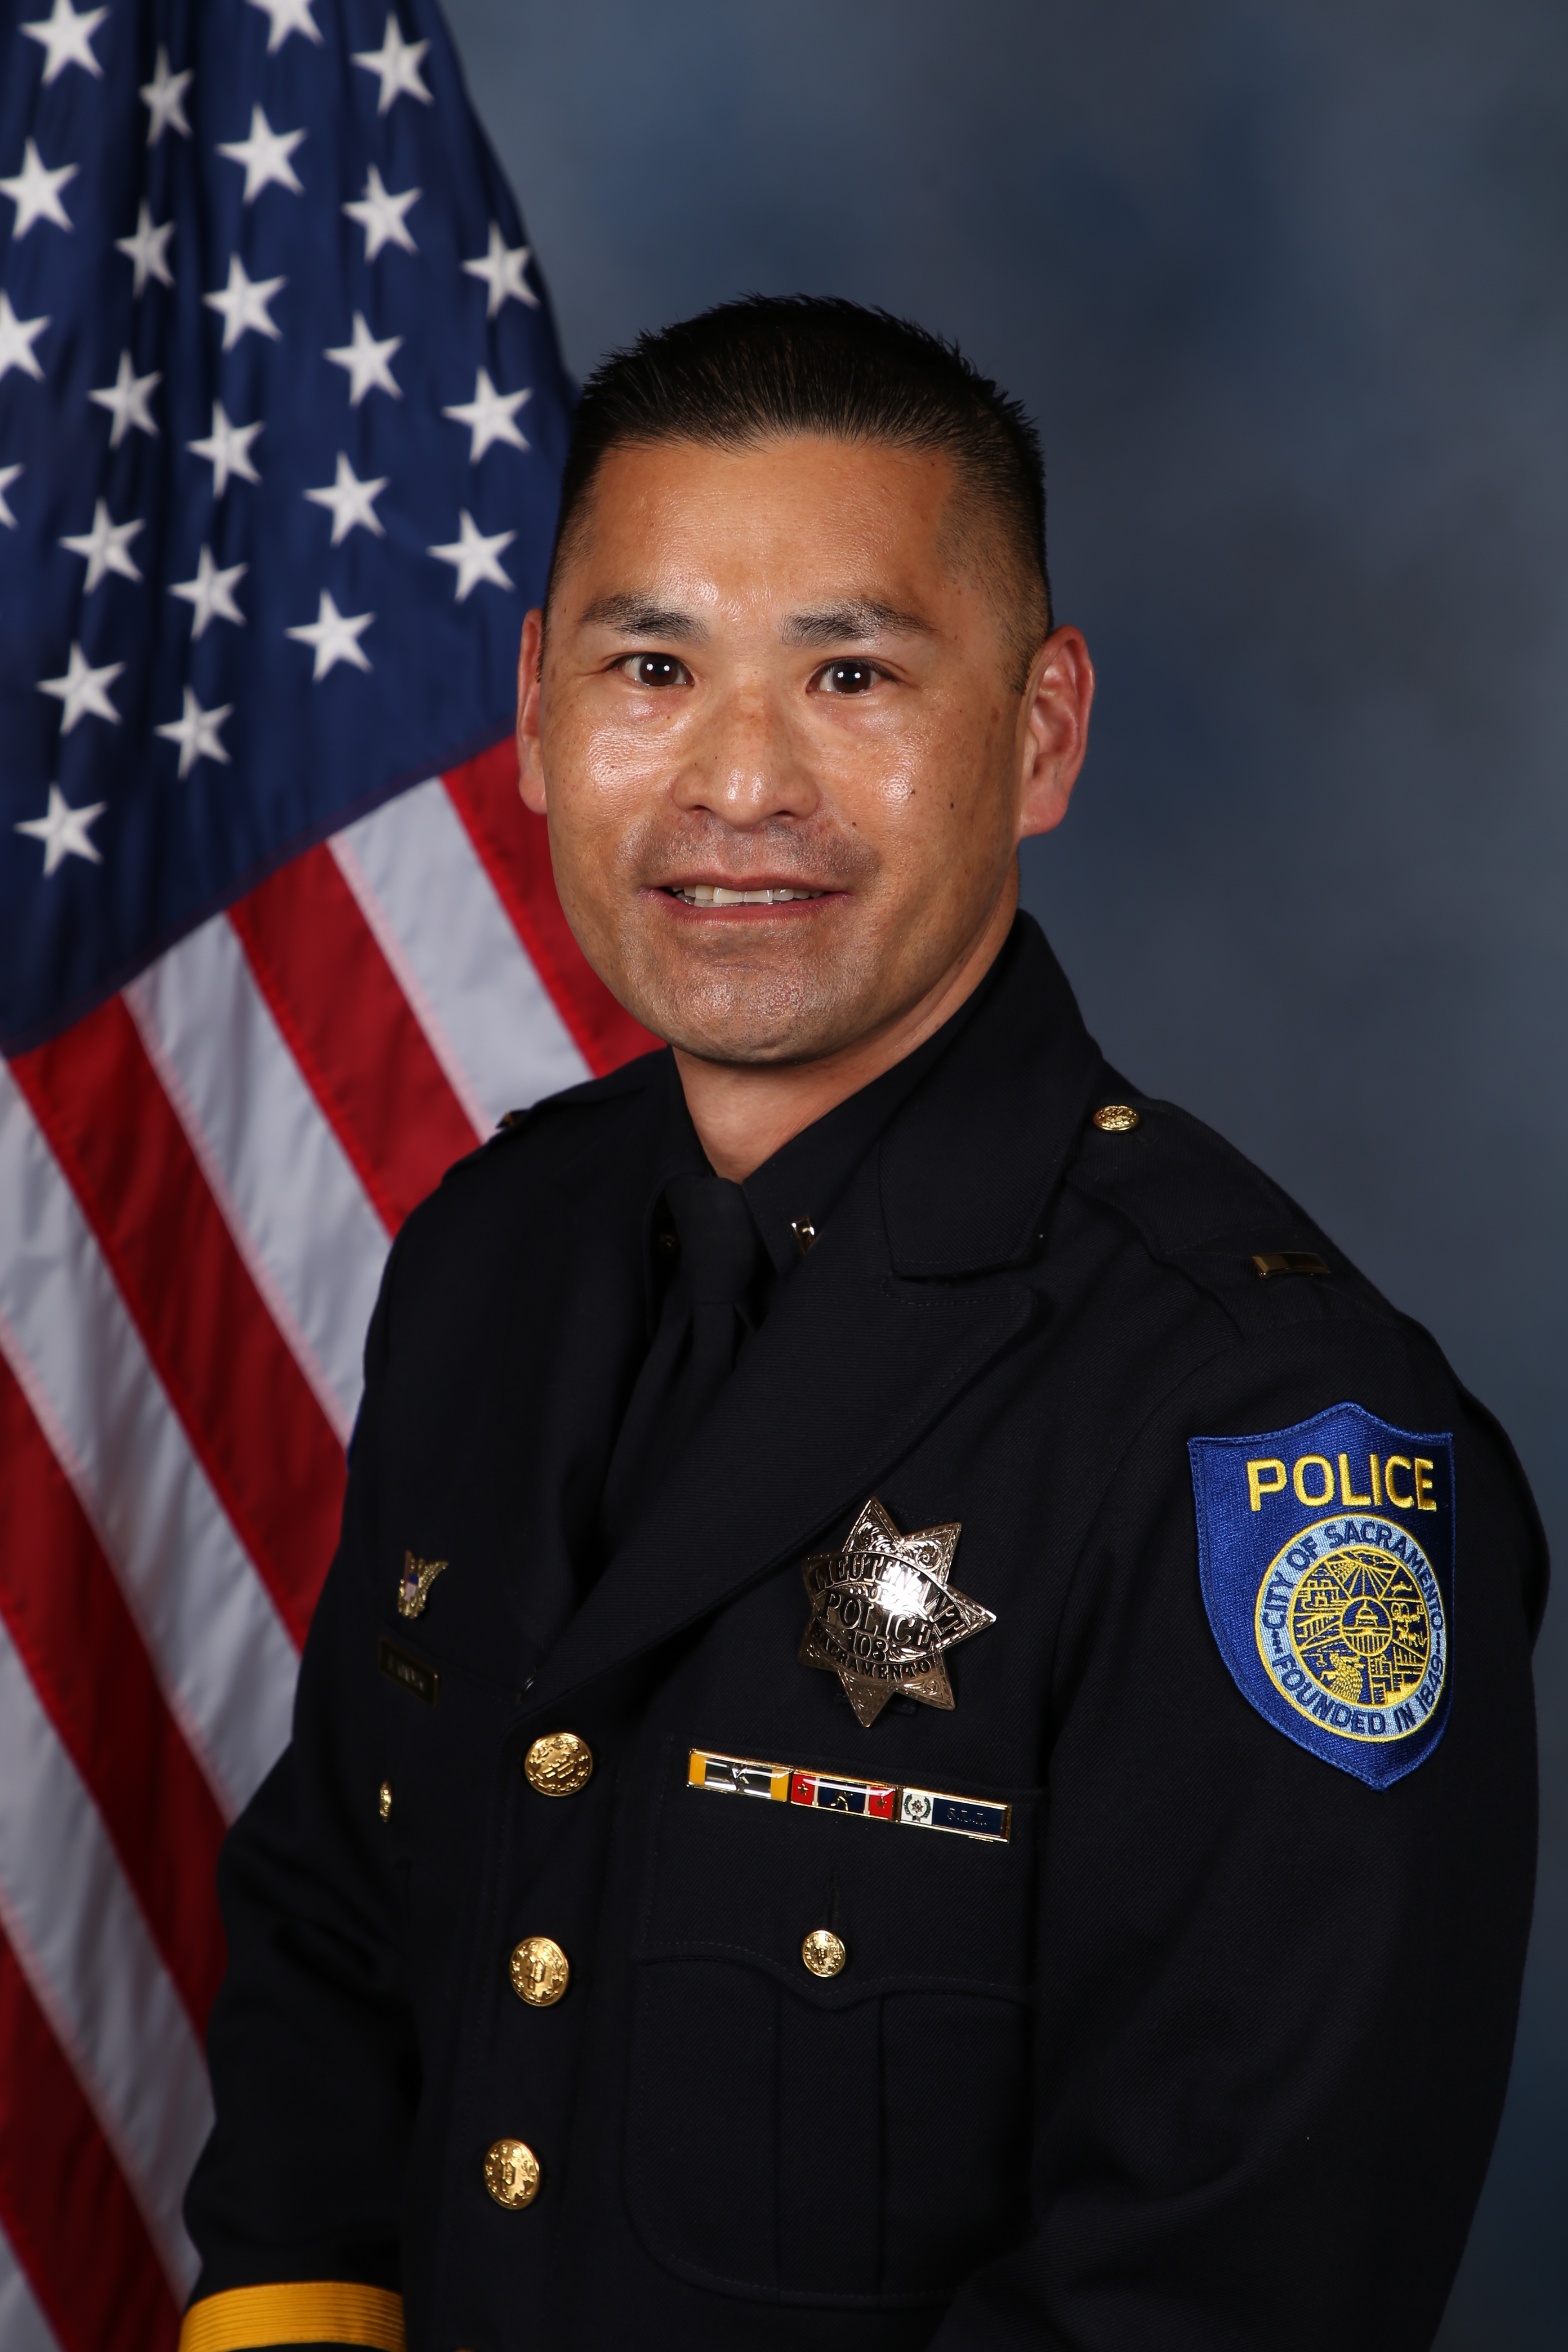 Photo of Chief of Brent Kaneyuki in uniform standing in front of the American flag.